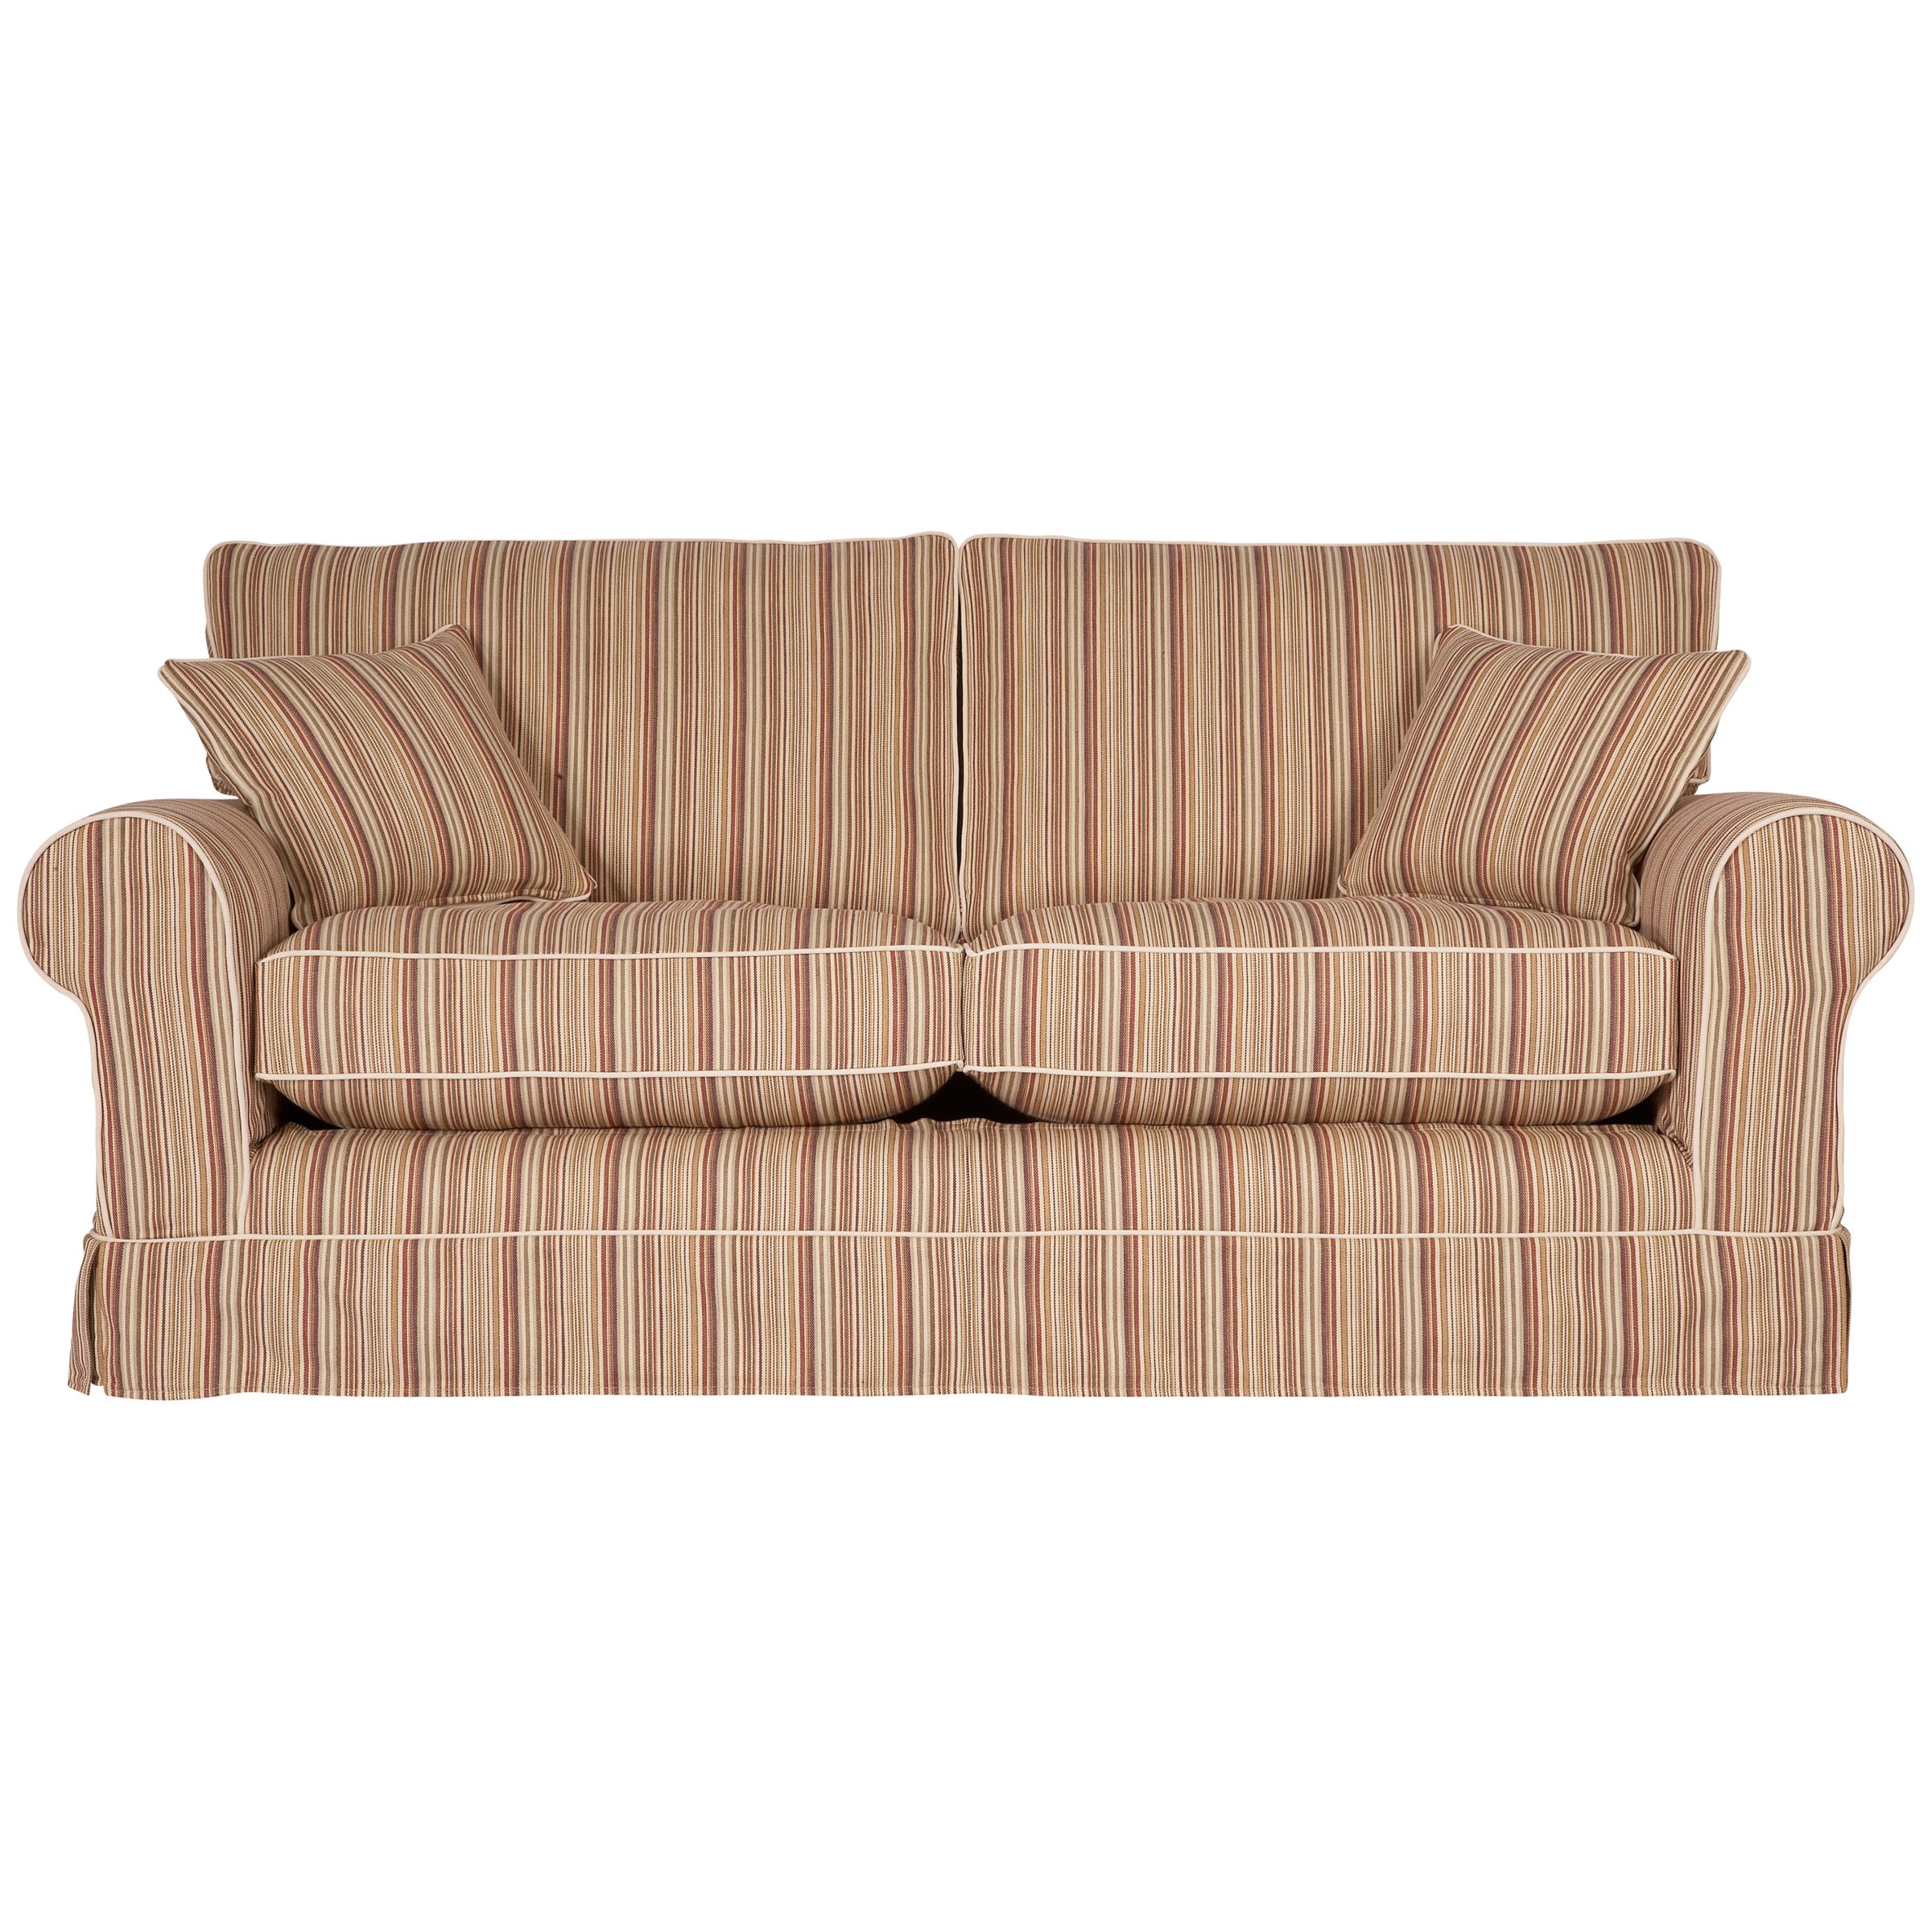 Padstow Large Sofa, Marcello Stripe